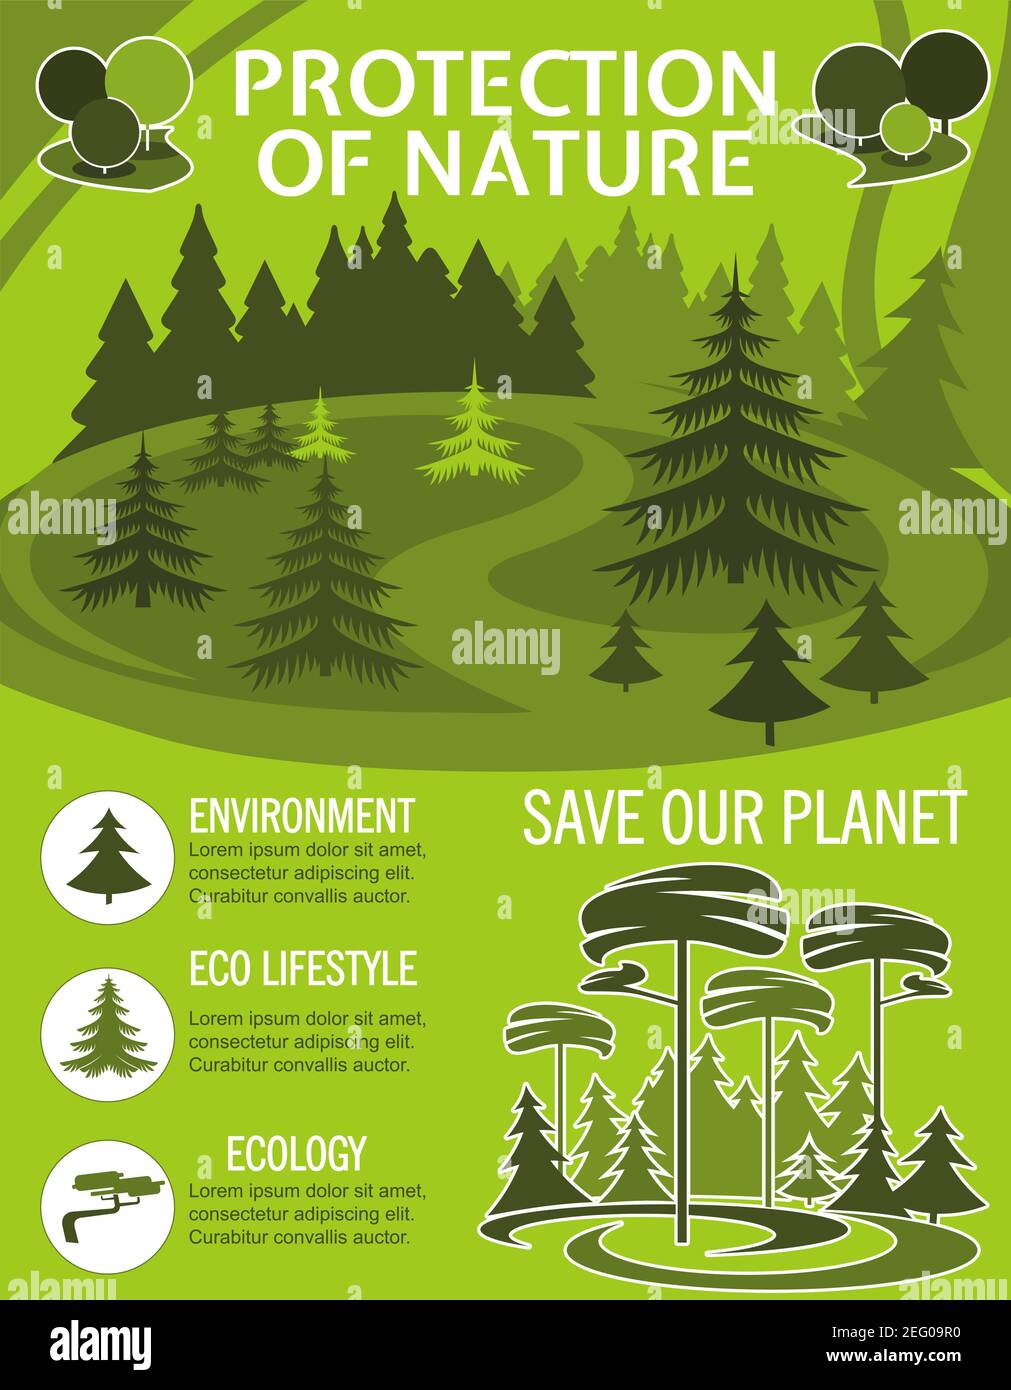 Save nature poster Stock Vector Images - Alamy